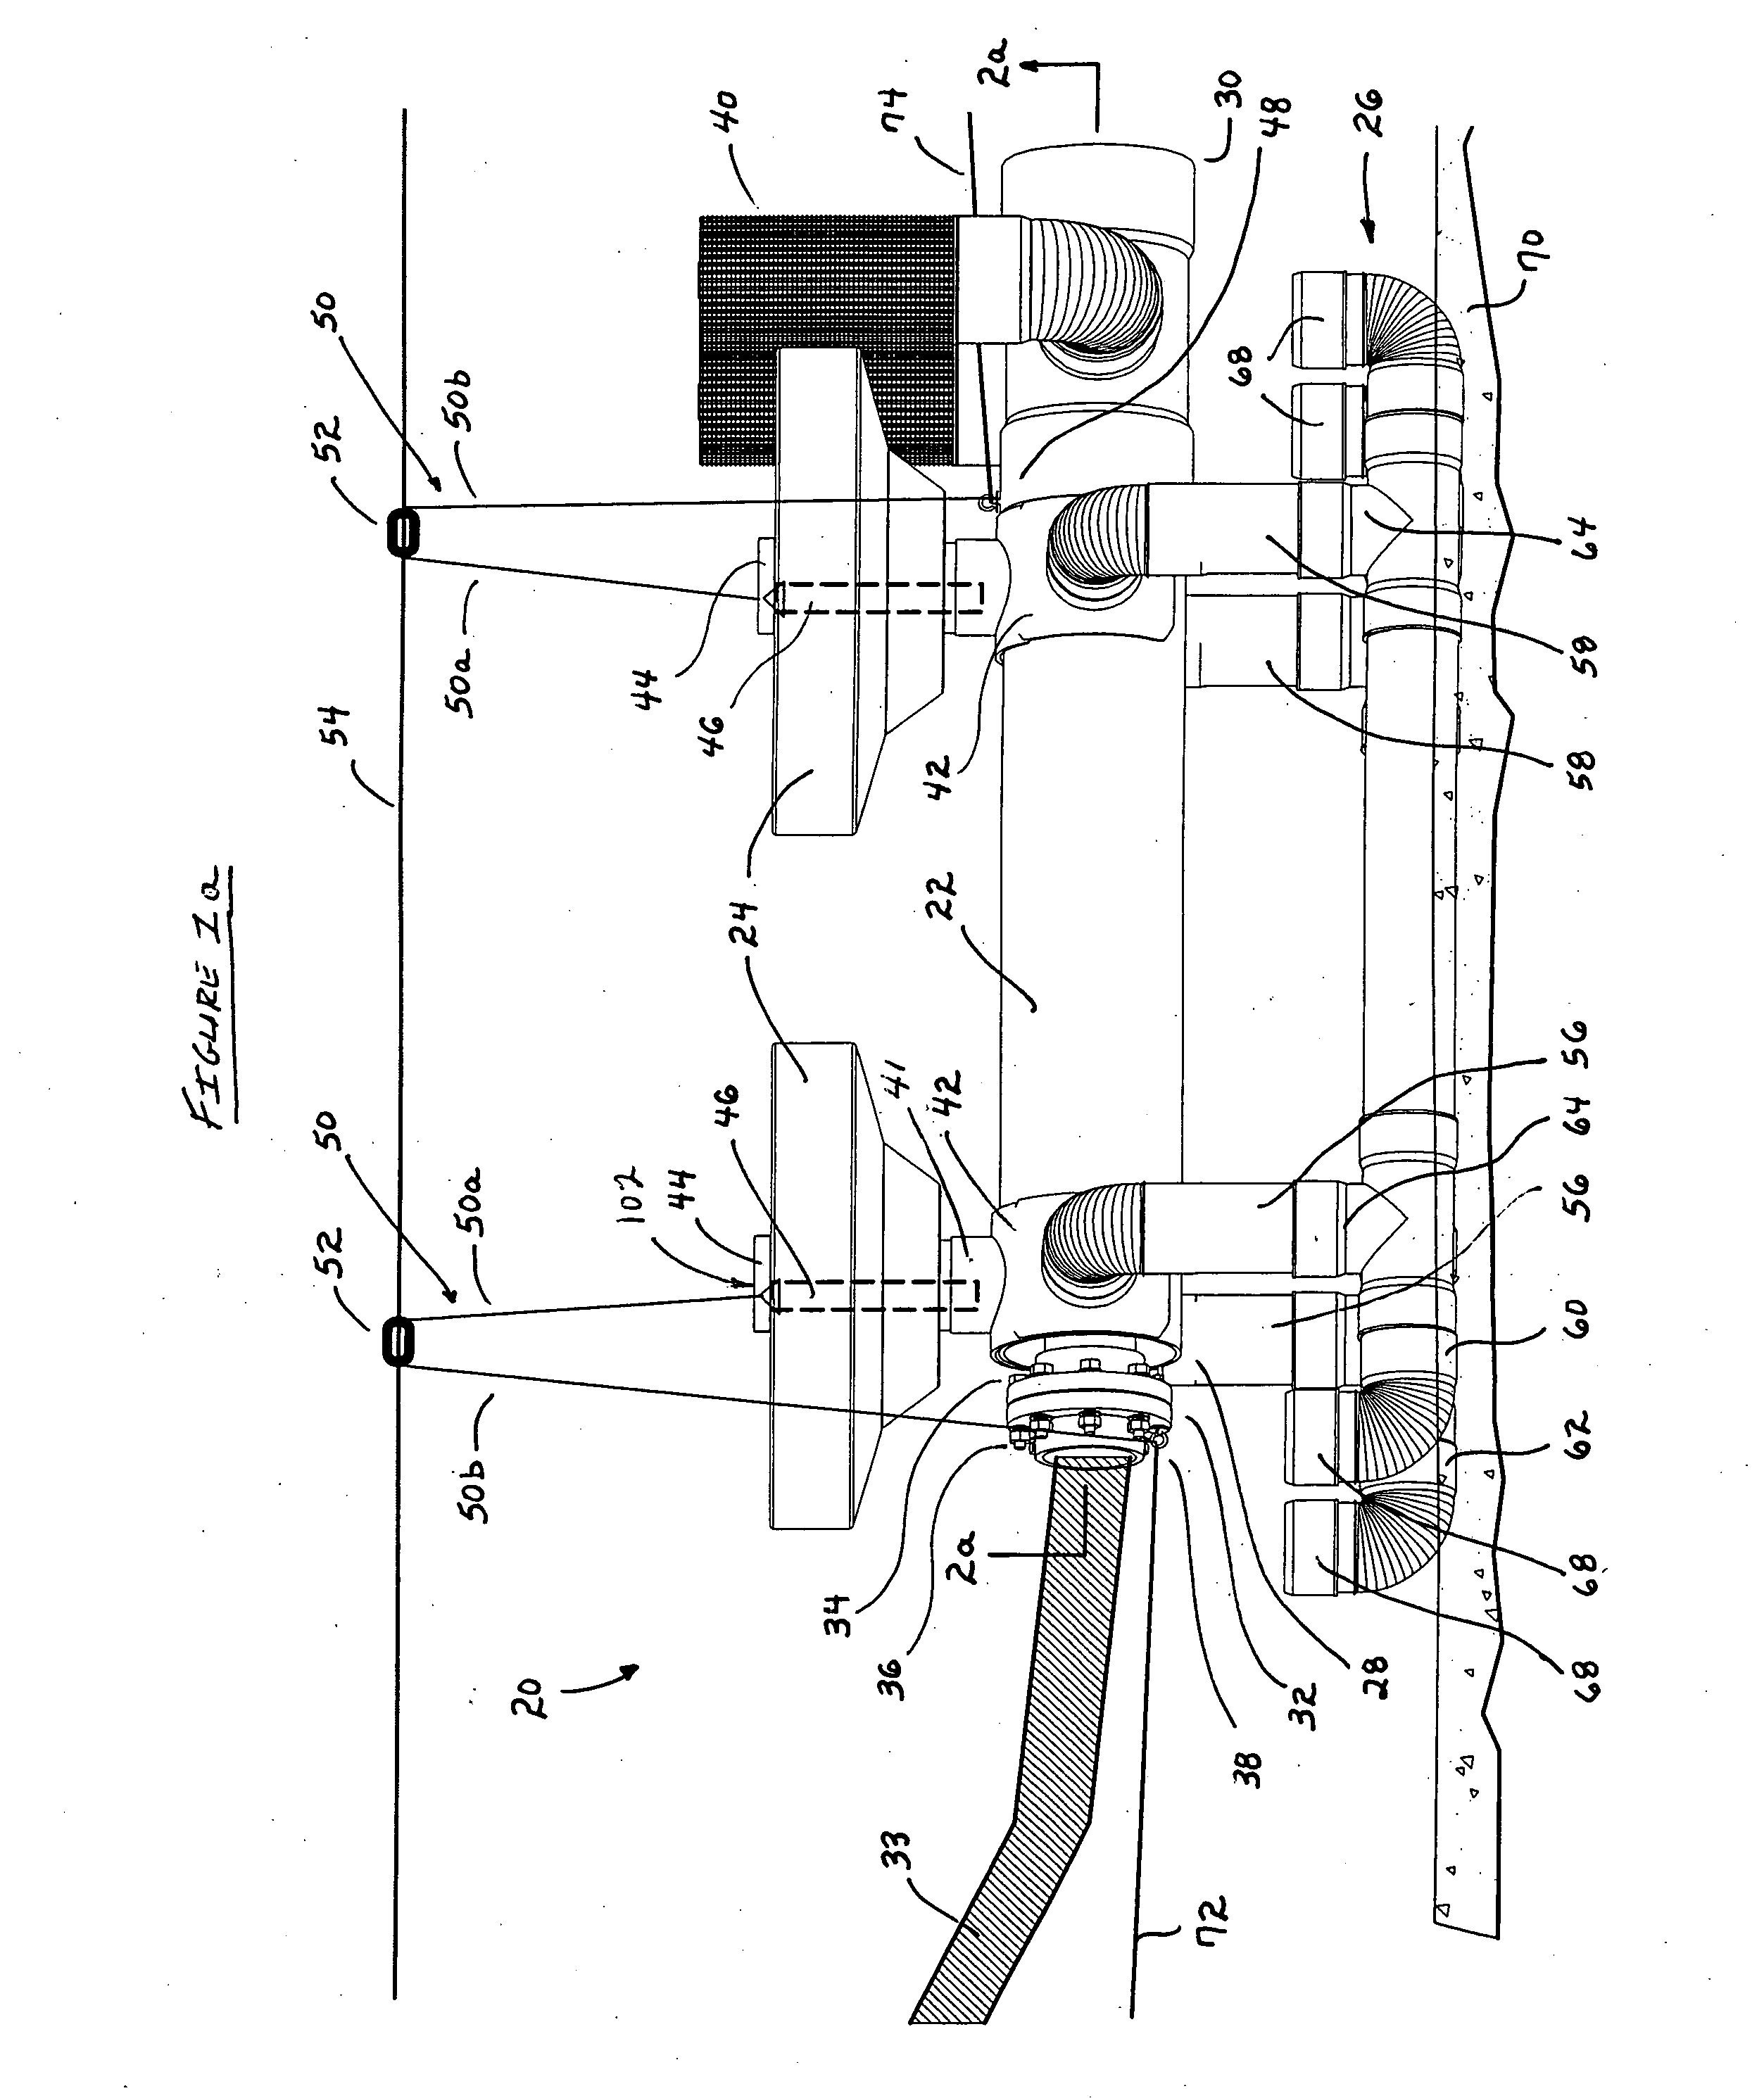 Submersible pump apparatus and method for using same